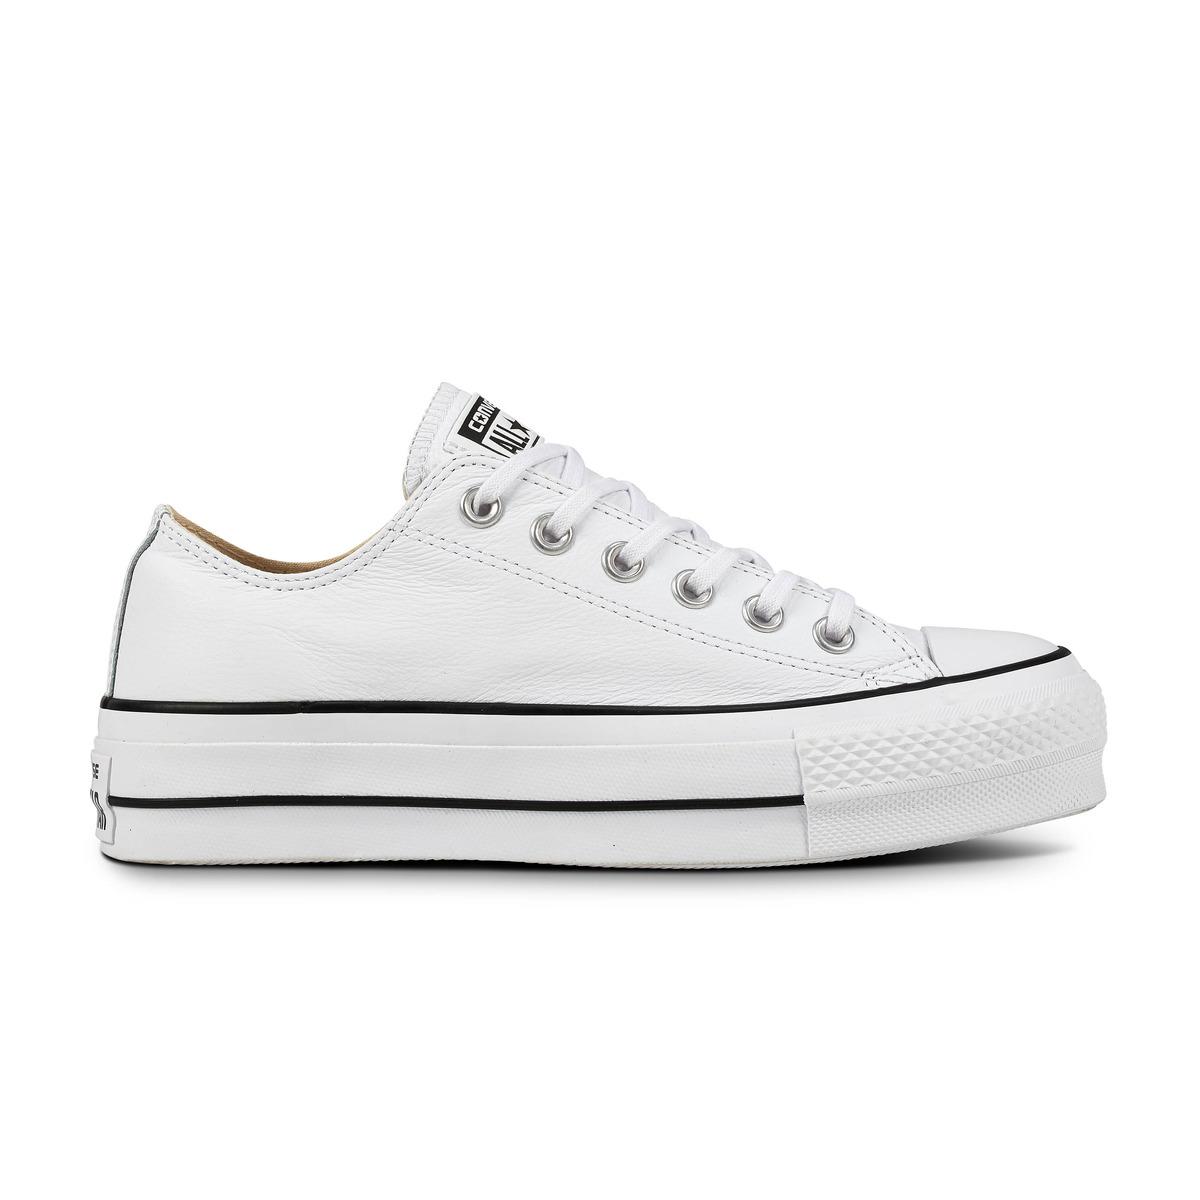 Converse Chuck Taylor All Star Lift Clean Platform Low Leather Casual Trainers in White - Lyst